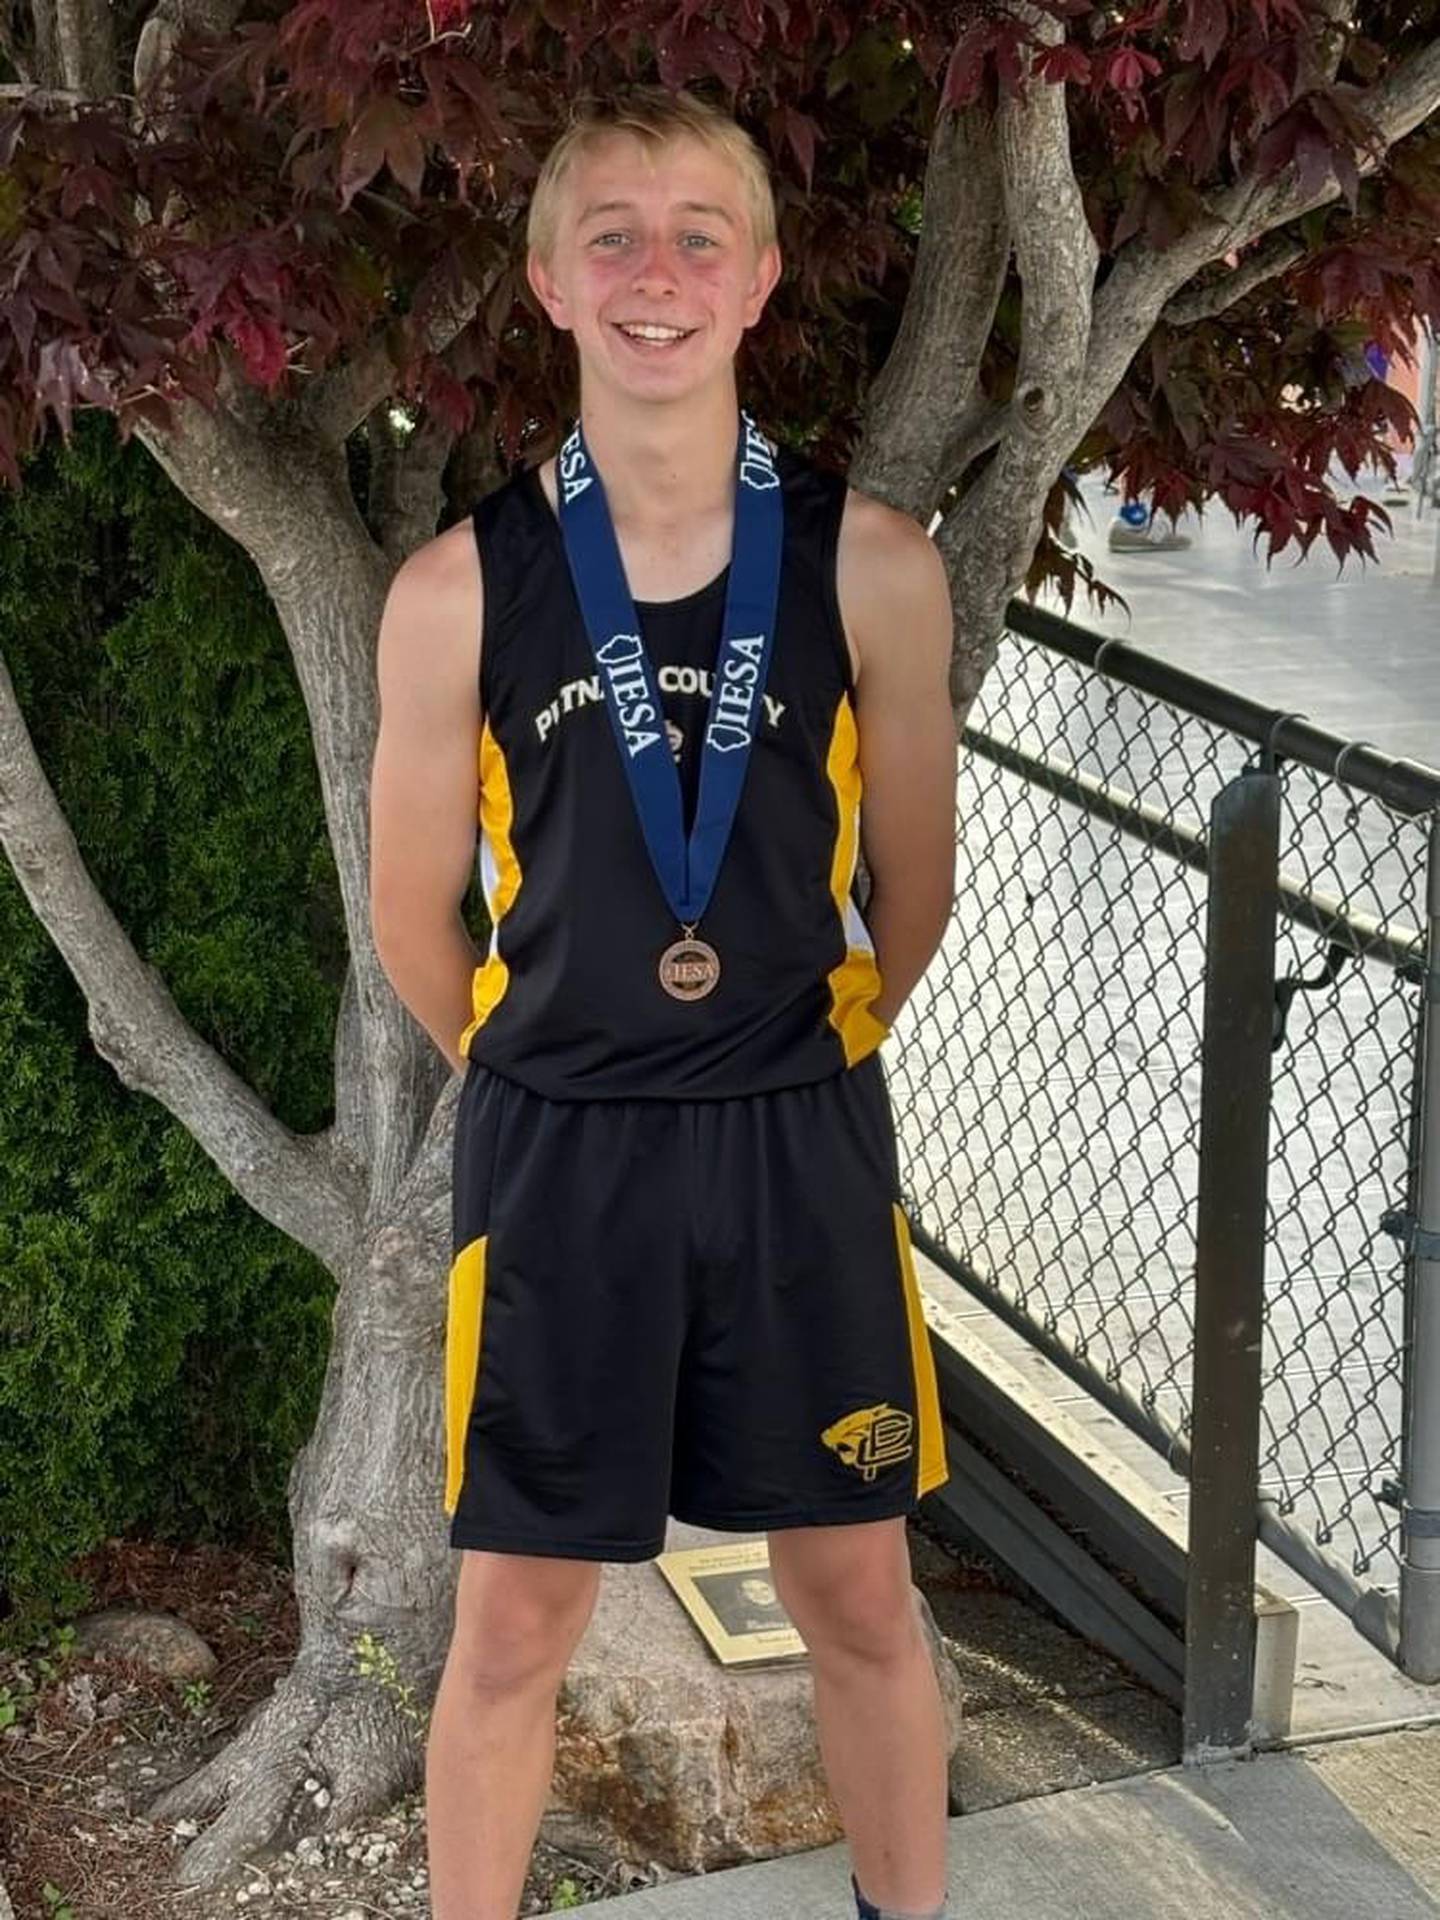 PCJH's Maddox Poole placed third in the 8th grade boys IESA 2A 1,600-meter run with a time of 5:01.12.